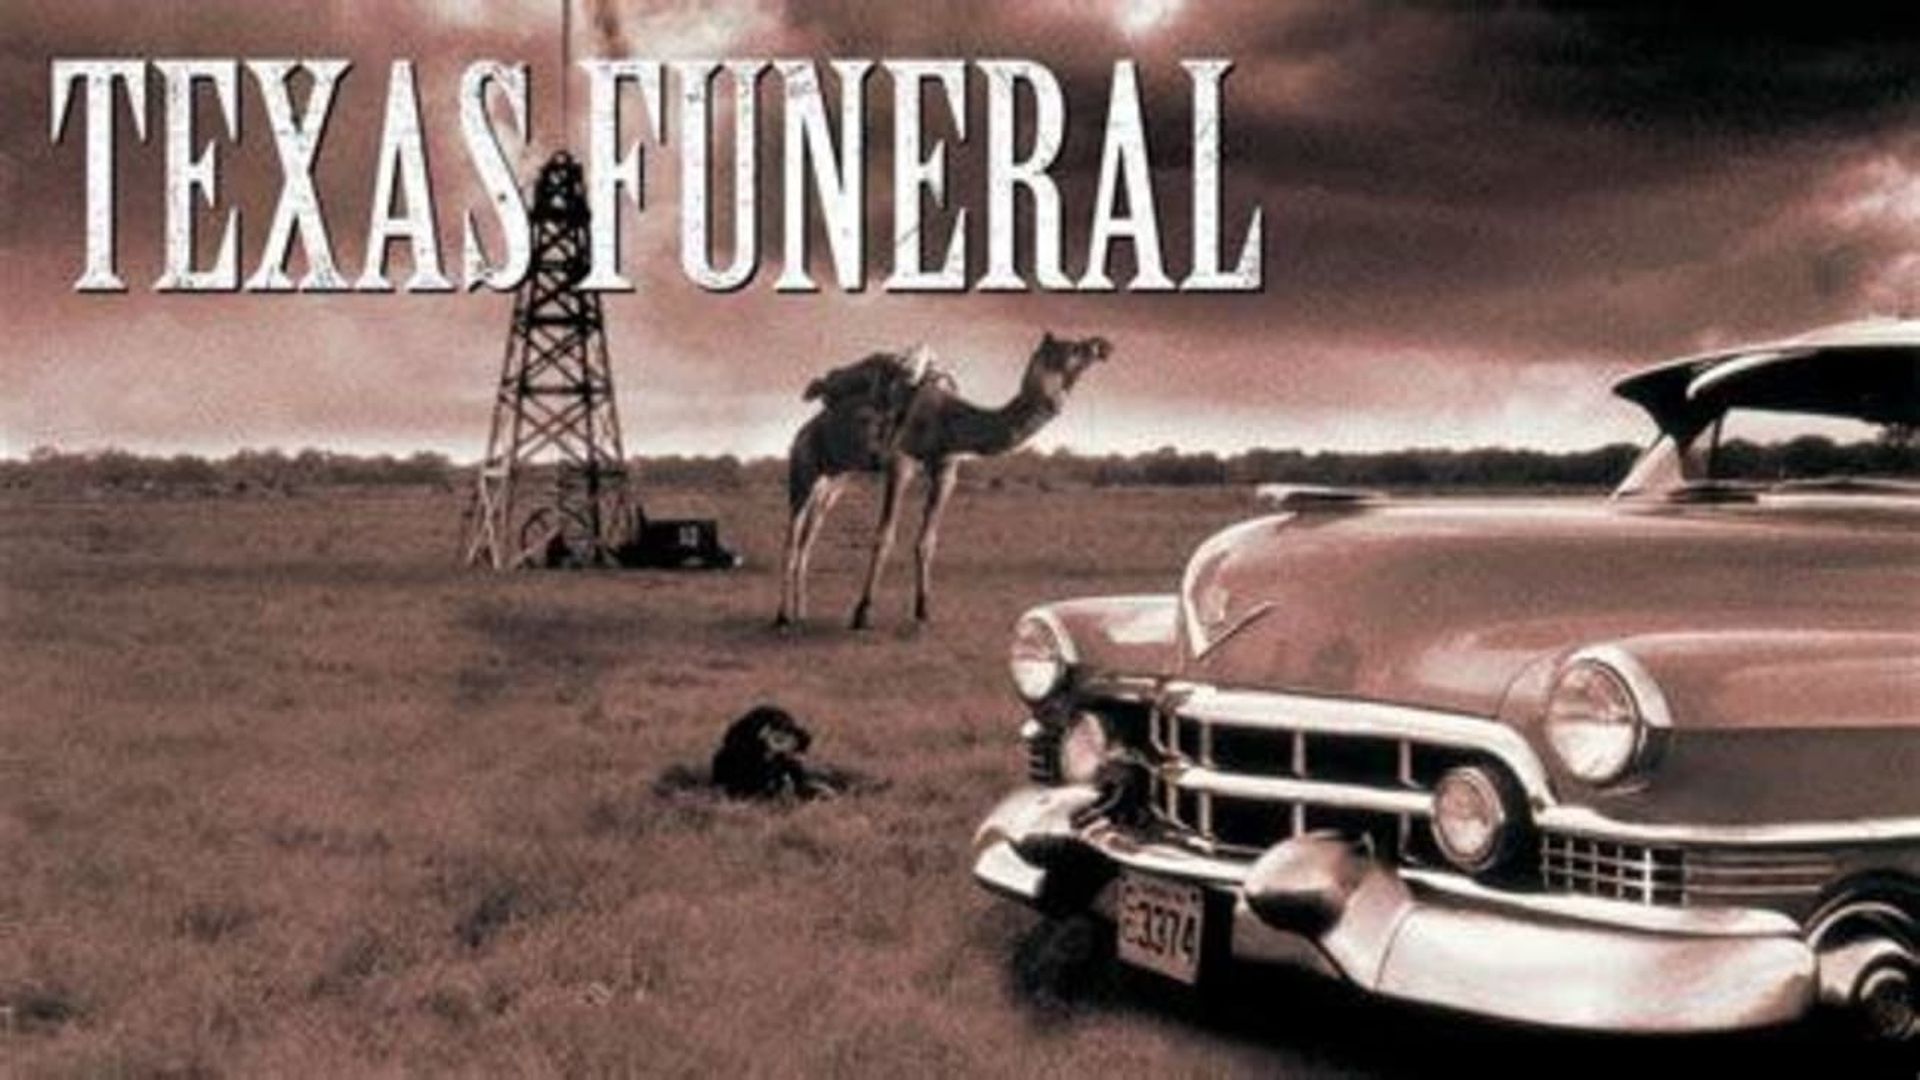 A Texas Funeral background